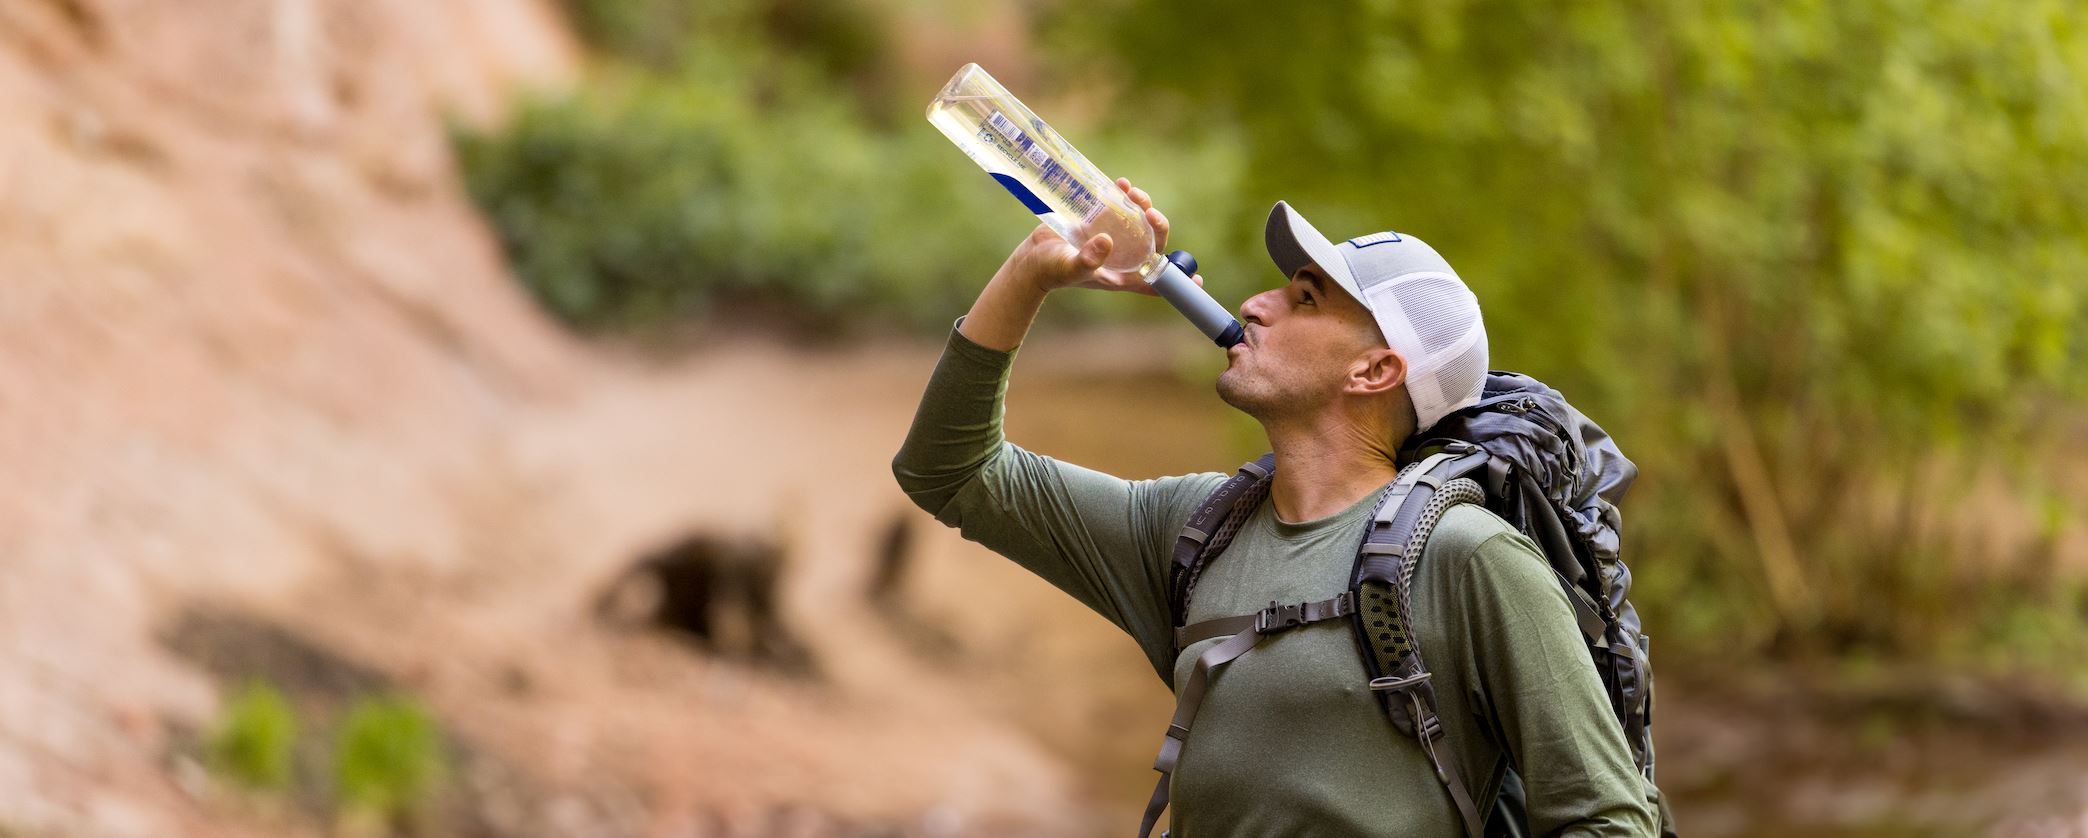 Choosing a Backpacking Water Filter